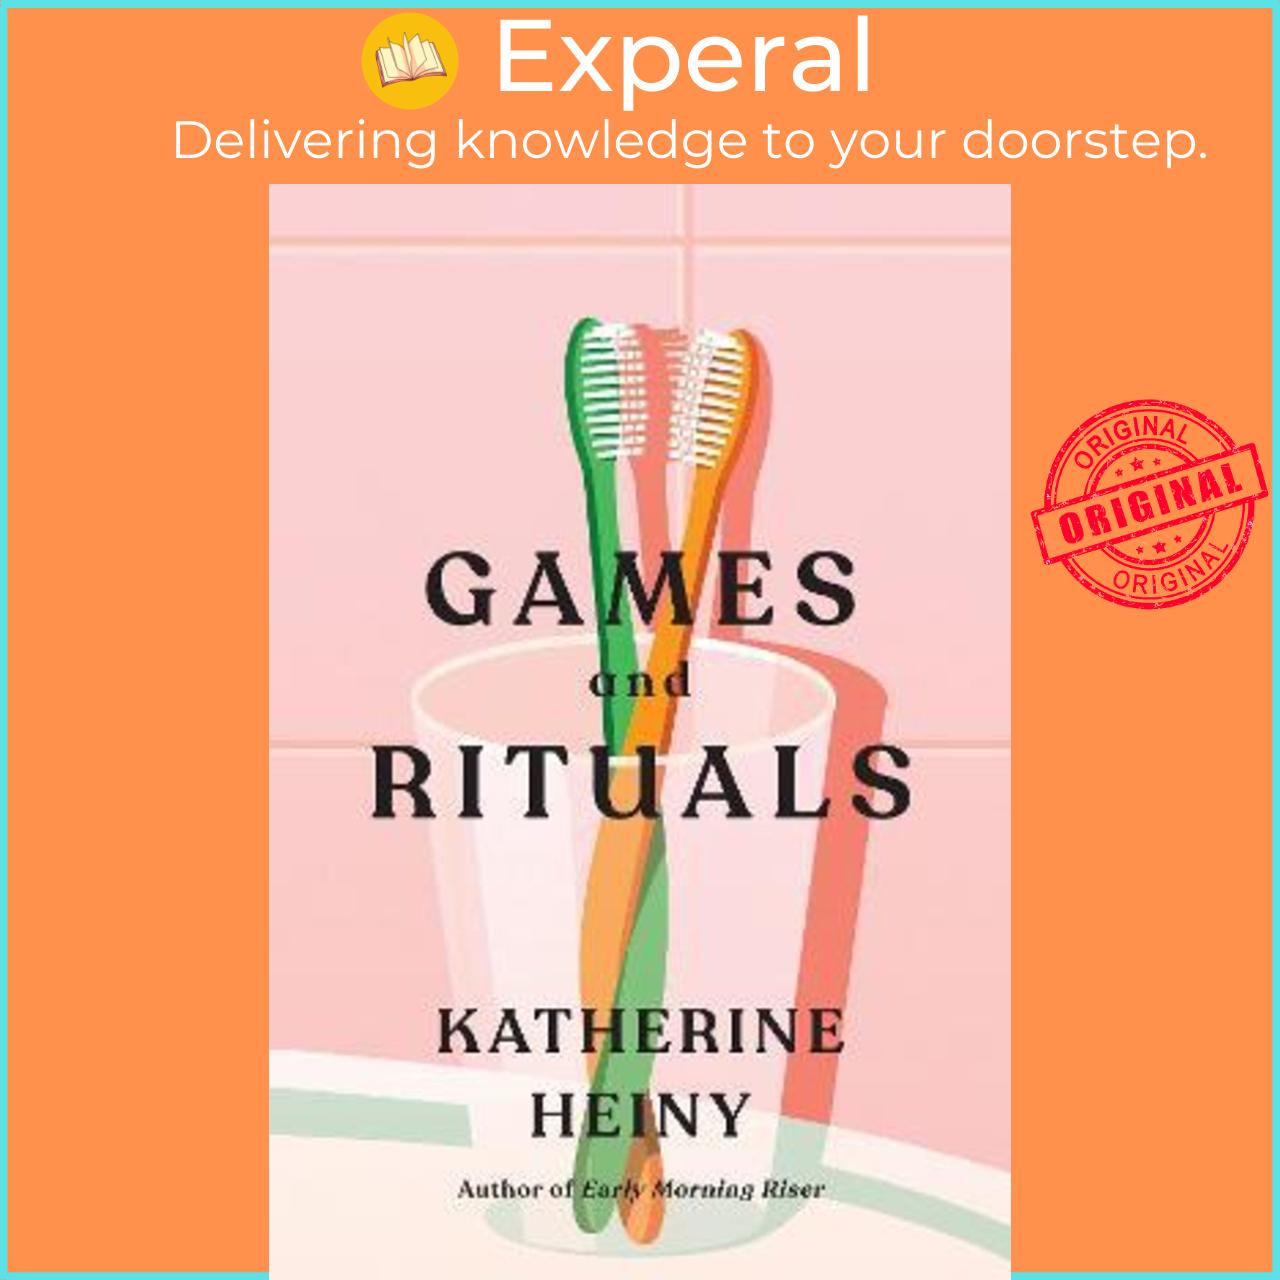 Hình ảnh Sách - Games and Rituals by Katherine Heiny (UK edition, hardcover)